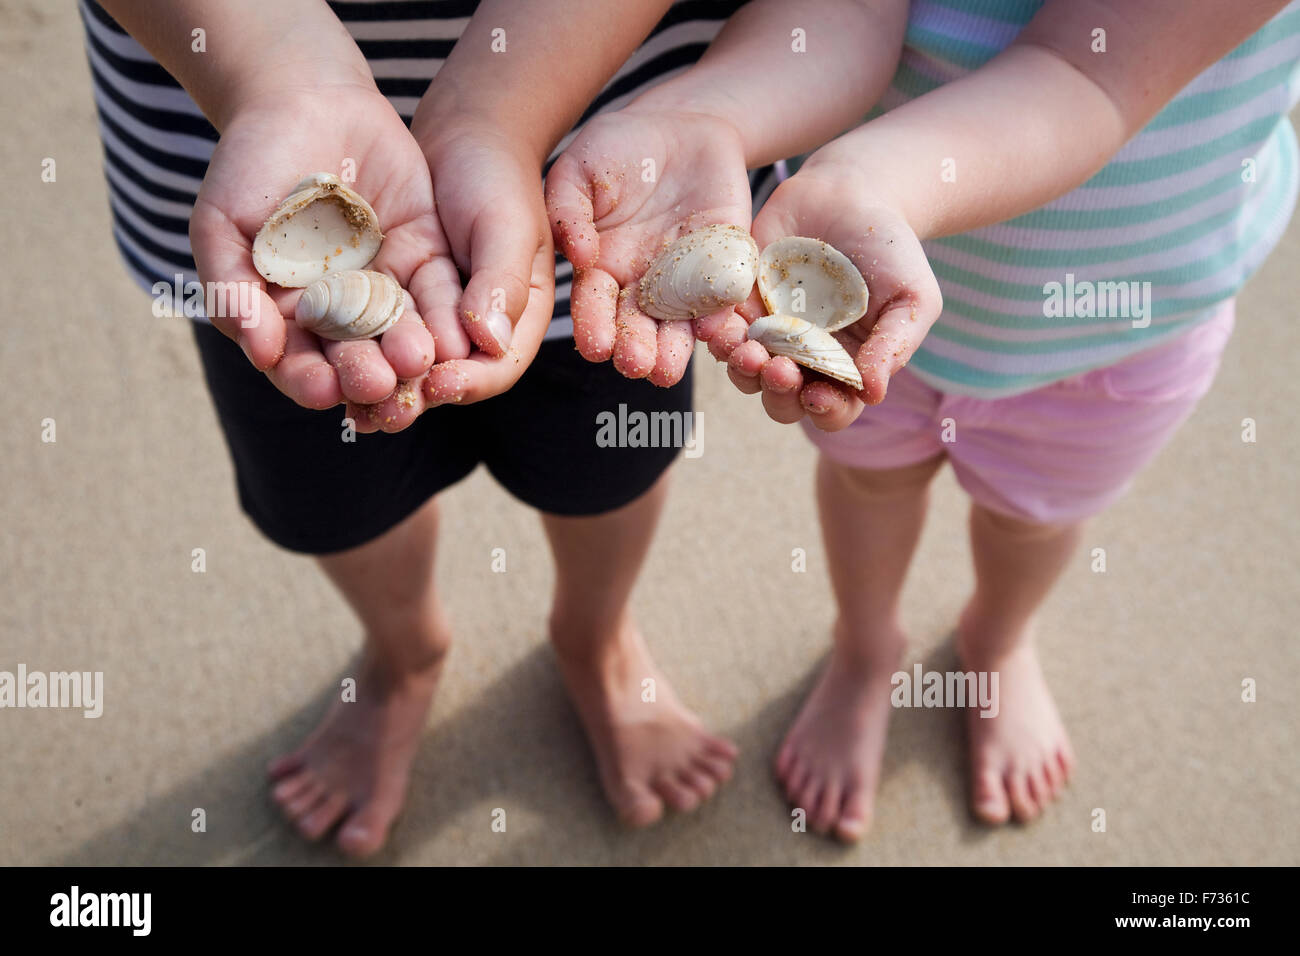 Two children with hands holding sea shells. Stock Photo